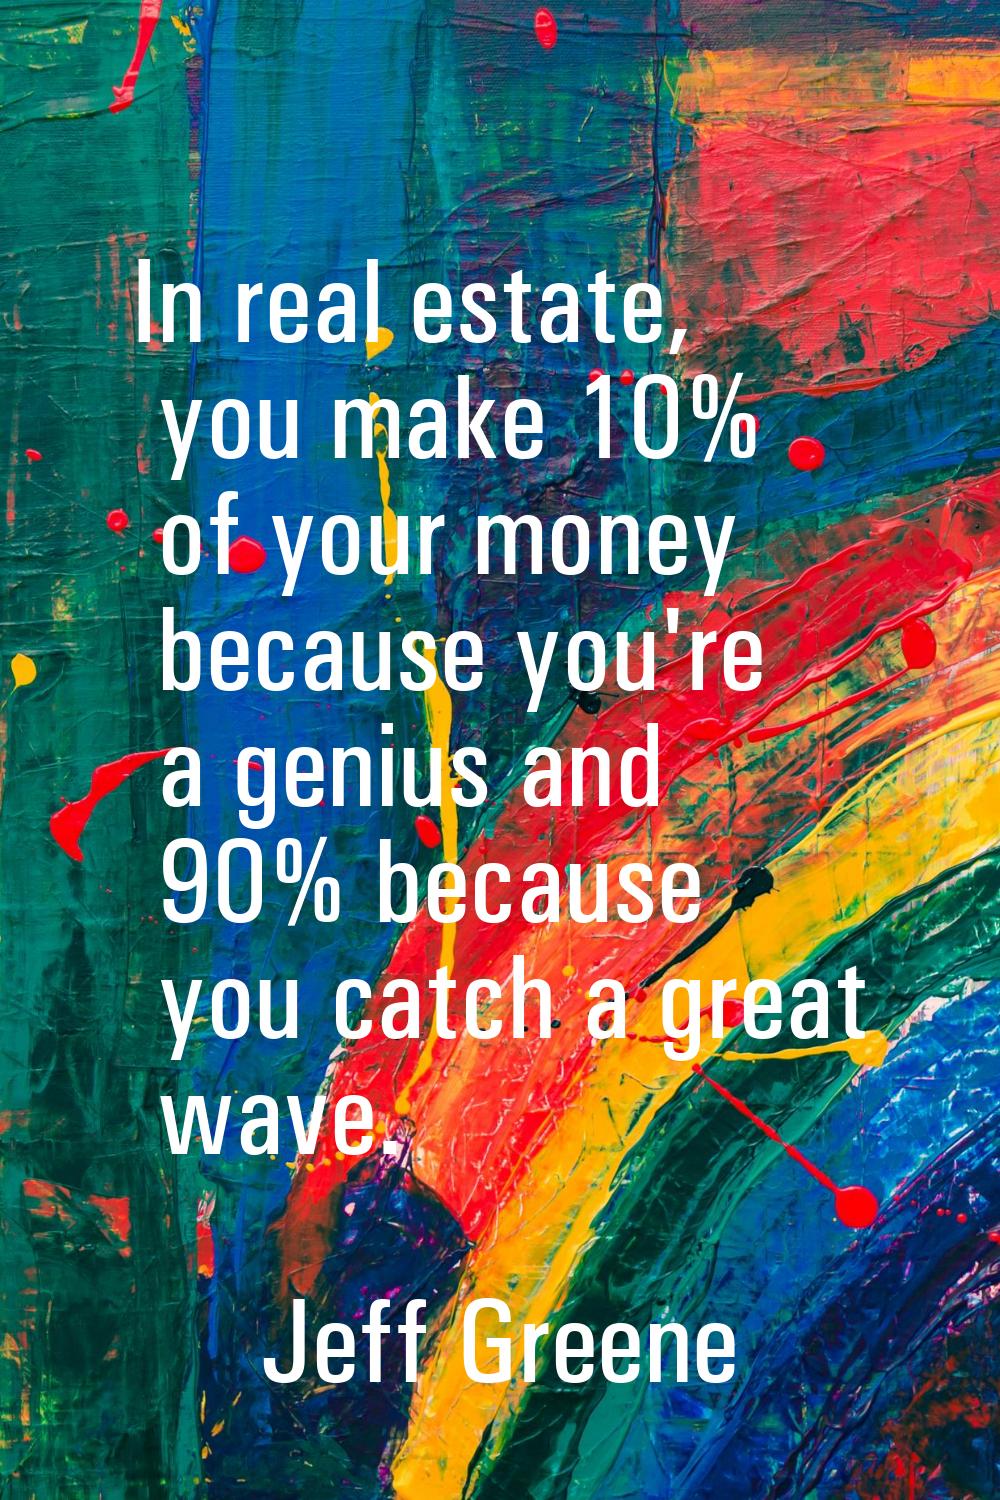 In real estate, you make 10% of your money because you're a genius and 90% because you catch a grea